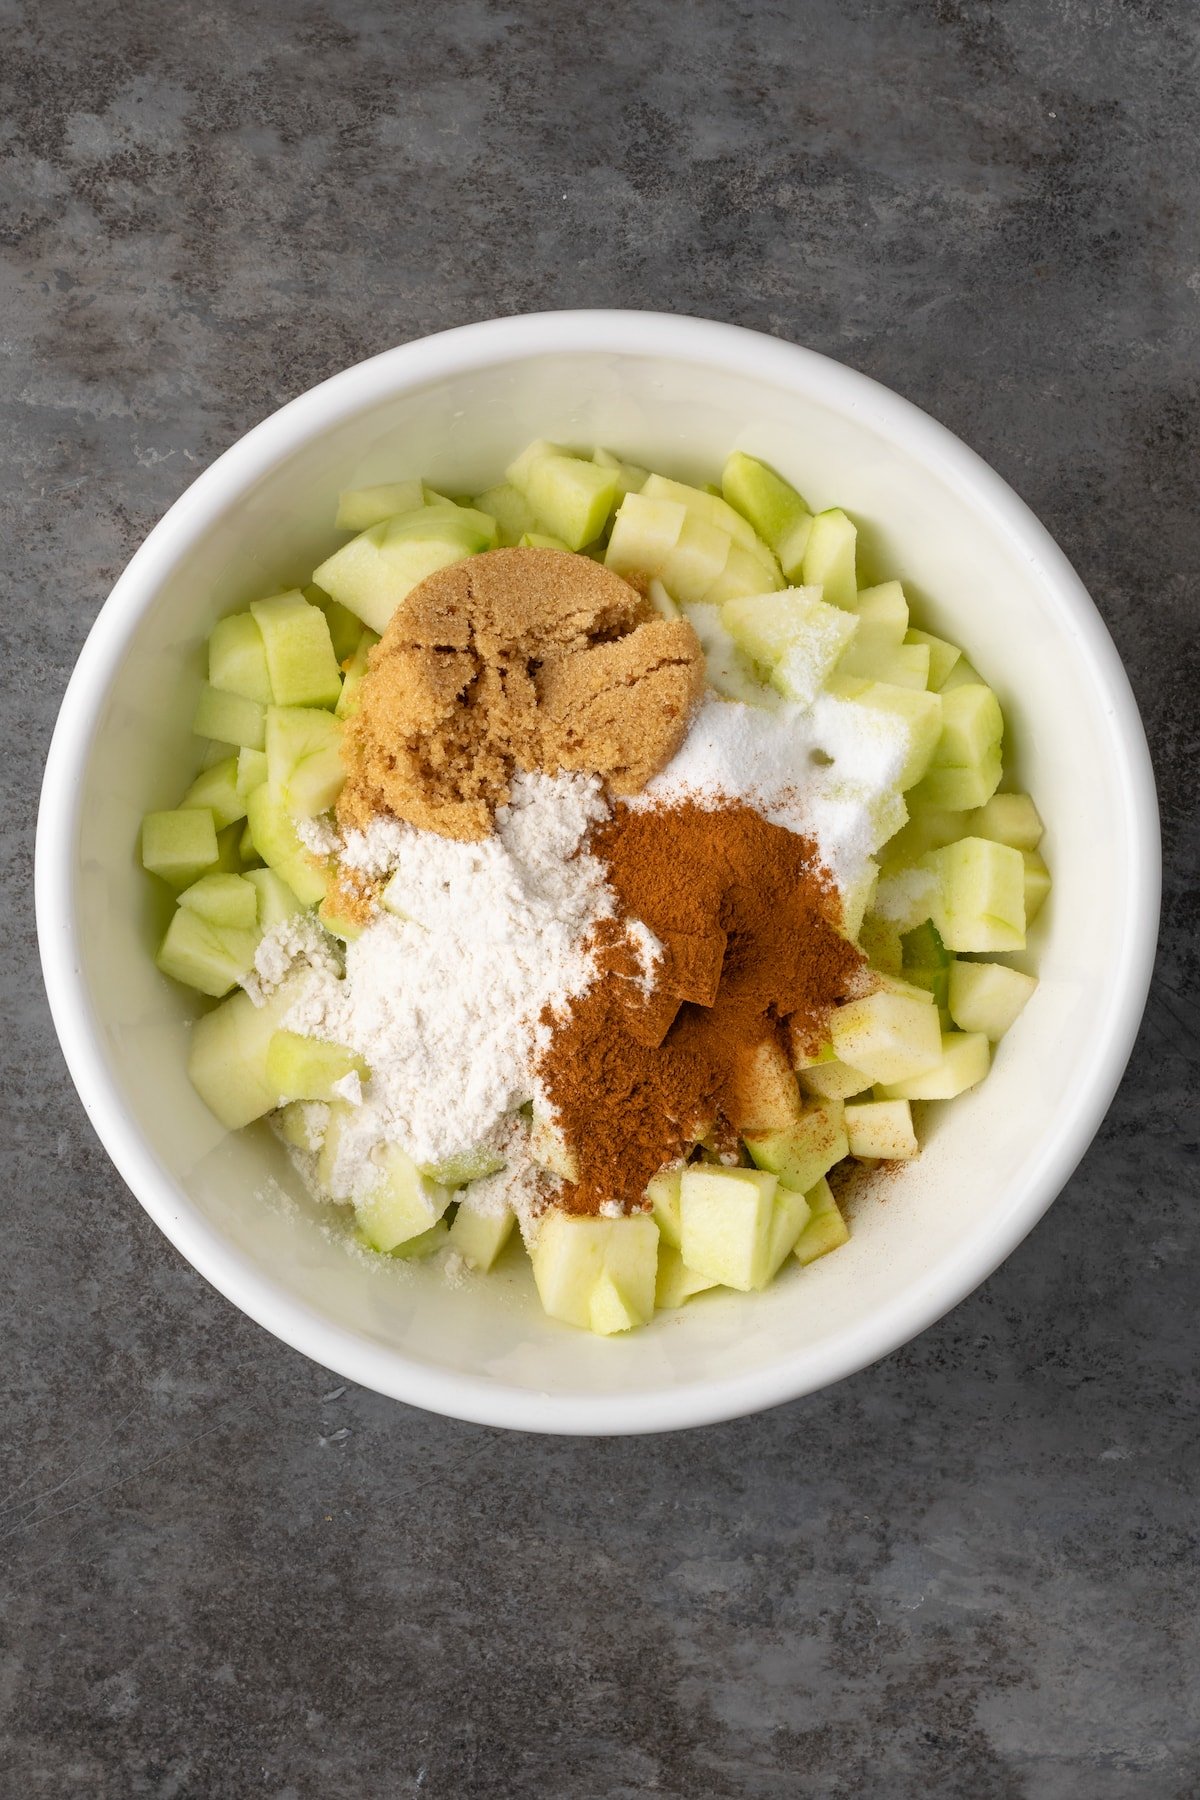 Apple pie filling ingredients added to a bowl of chopped apples.